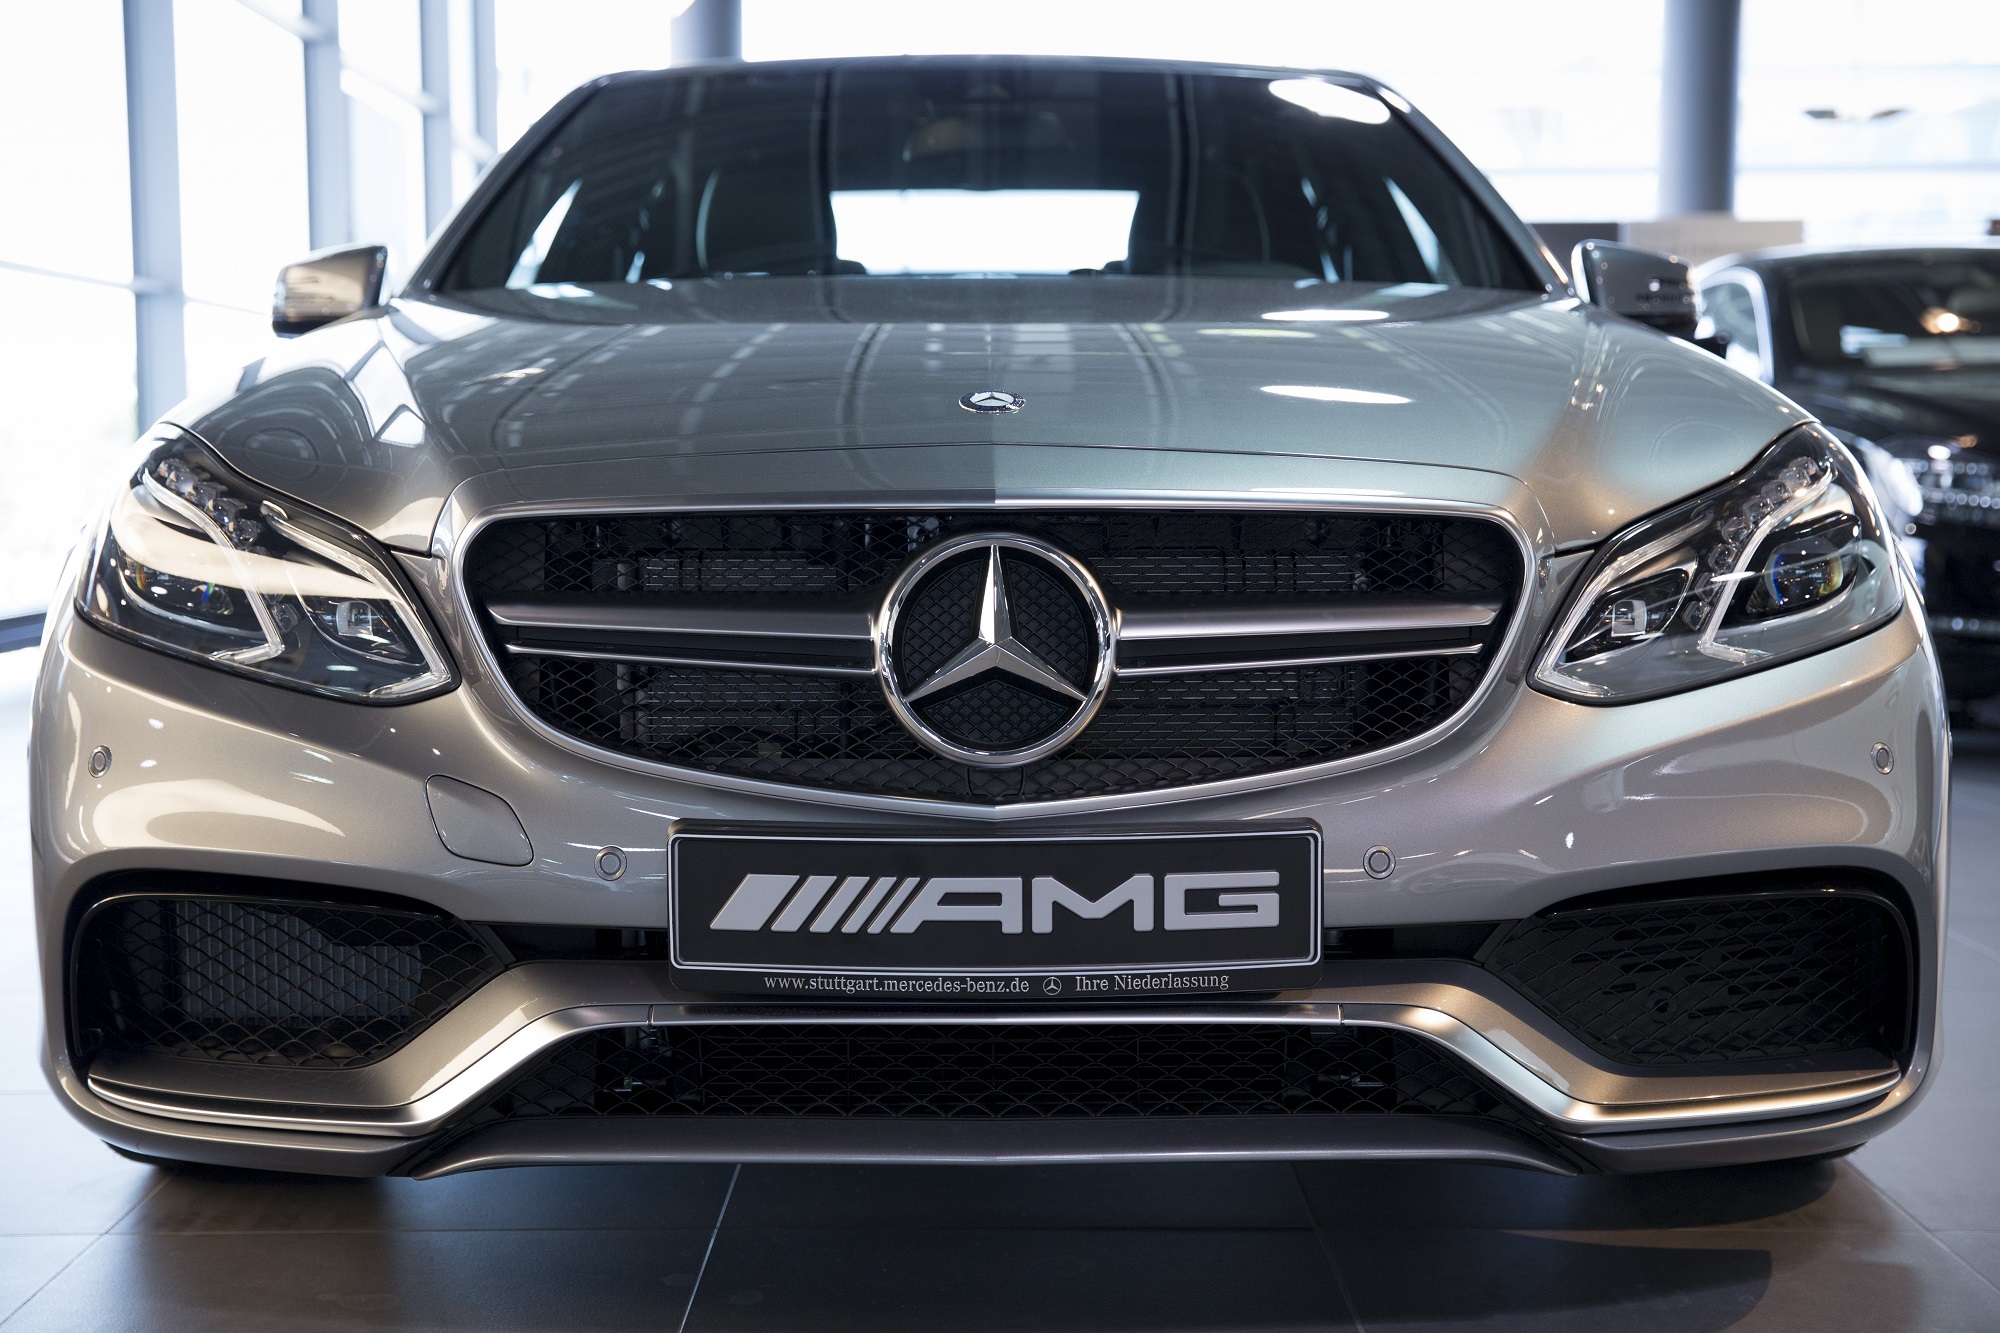 Mercedes-Benz E63 AMG is one of 7 Cheapest Cars That Will Do 200 MPH